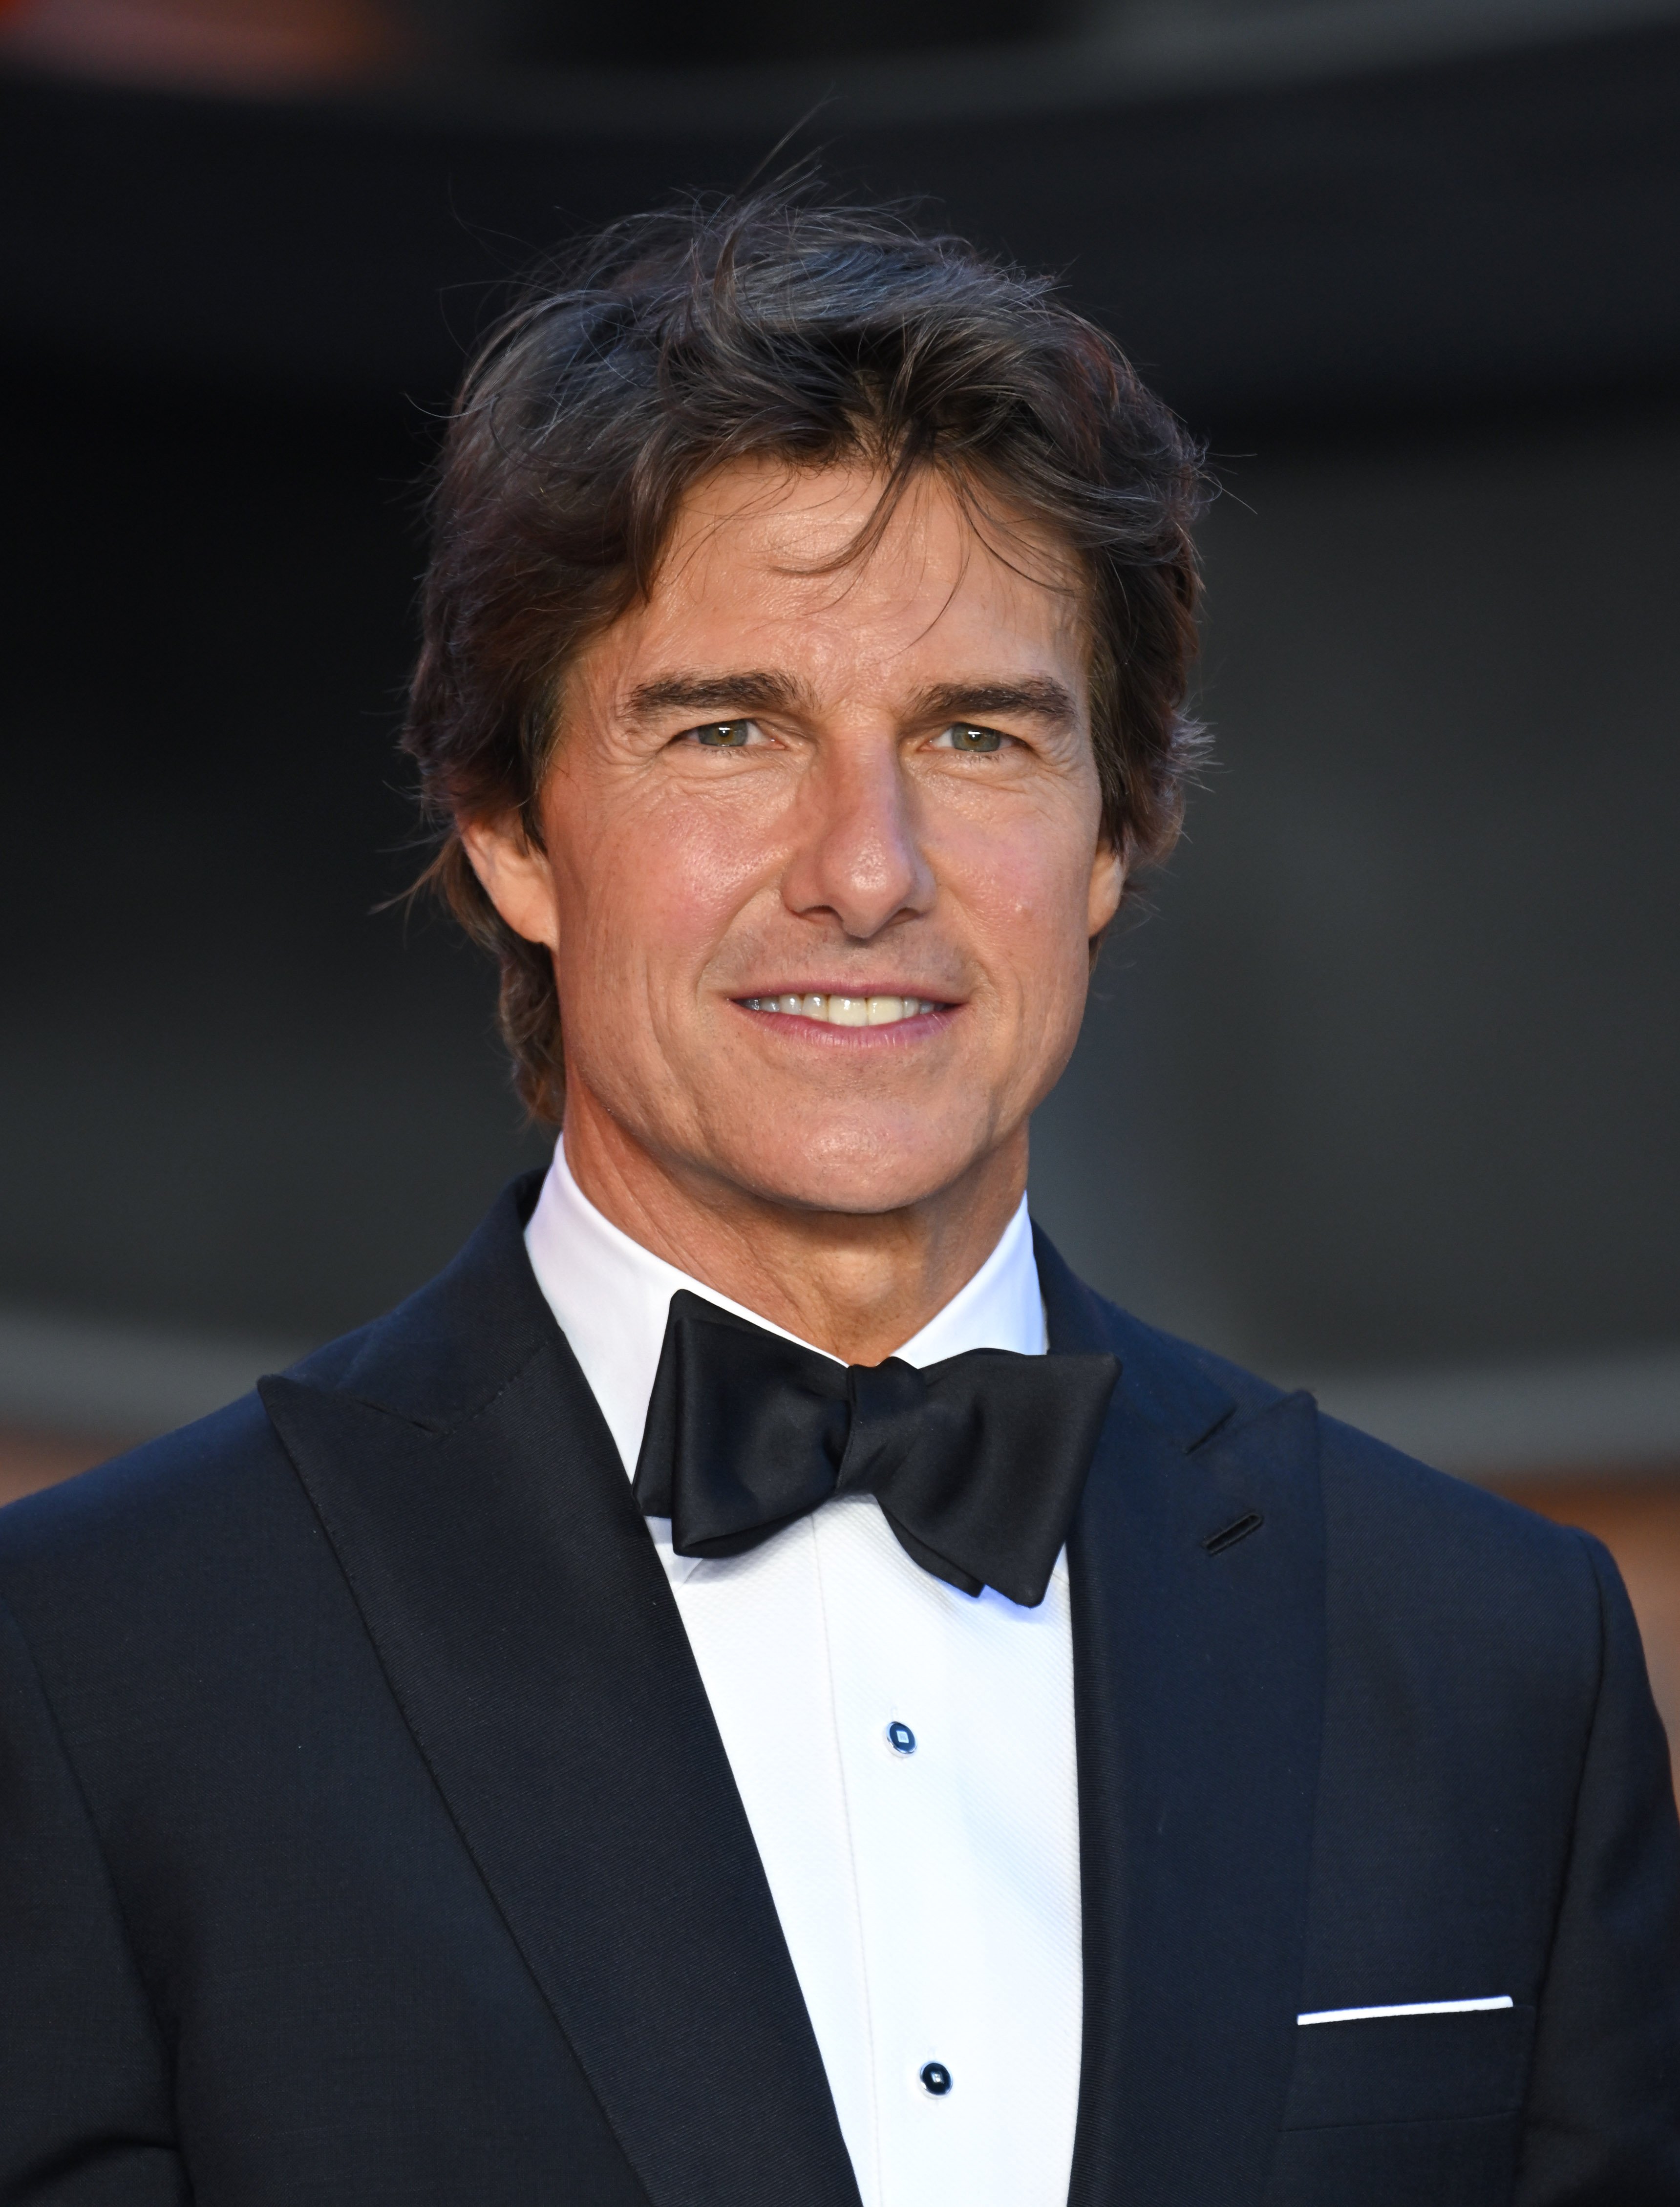 Tom Cruise attends the Royal Performance of "Top Gun: Maverick" at Leicester Square on May 19, 2022 in London, England. | Source: Getty Images